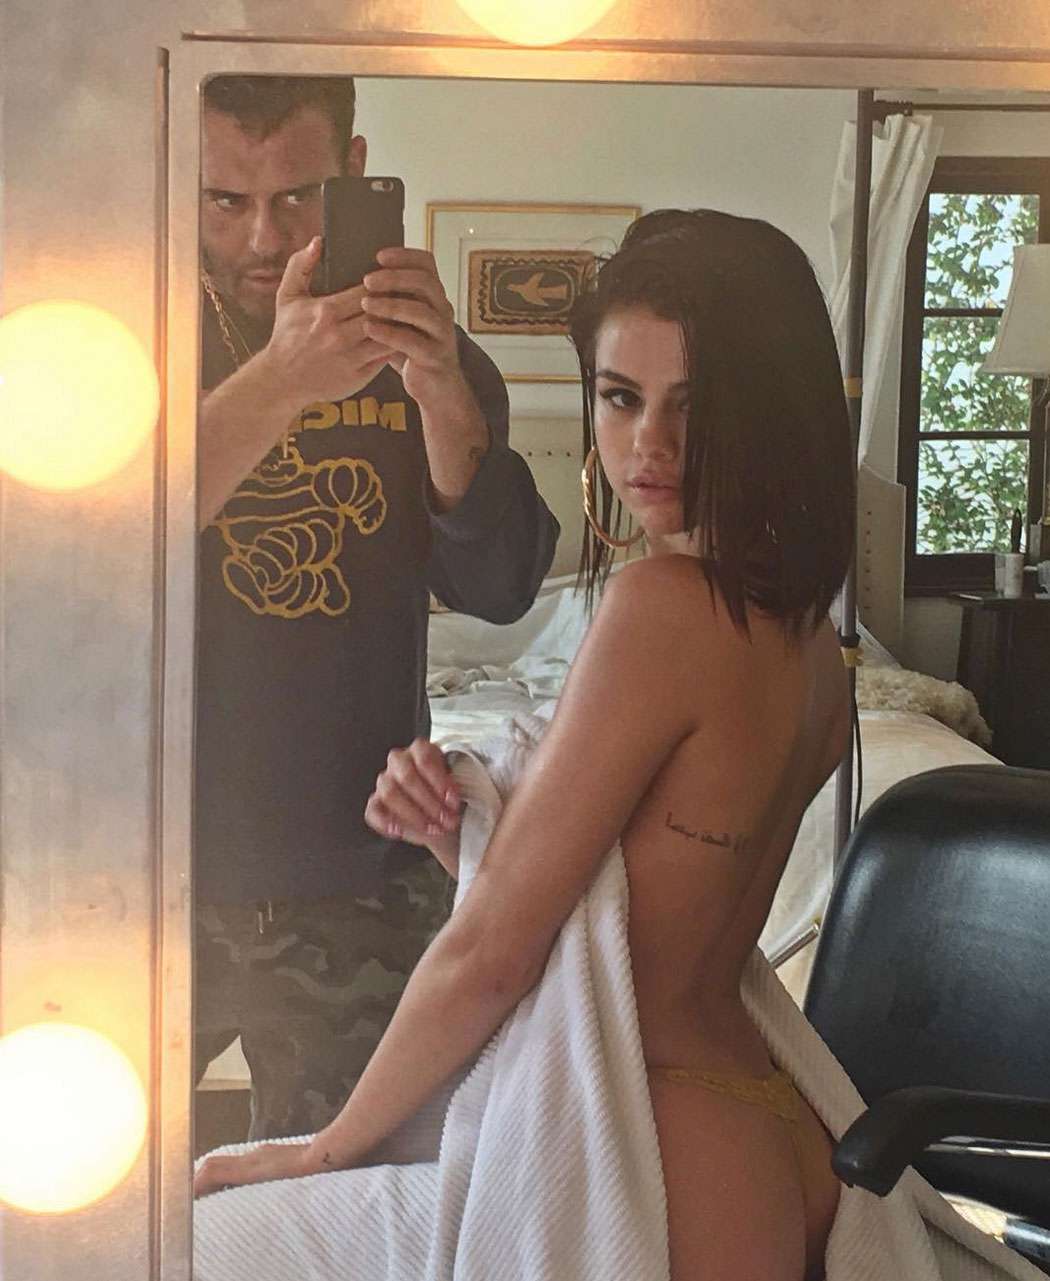 dan smale recommends selena gomez real naked pics pic